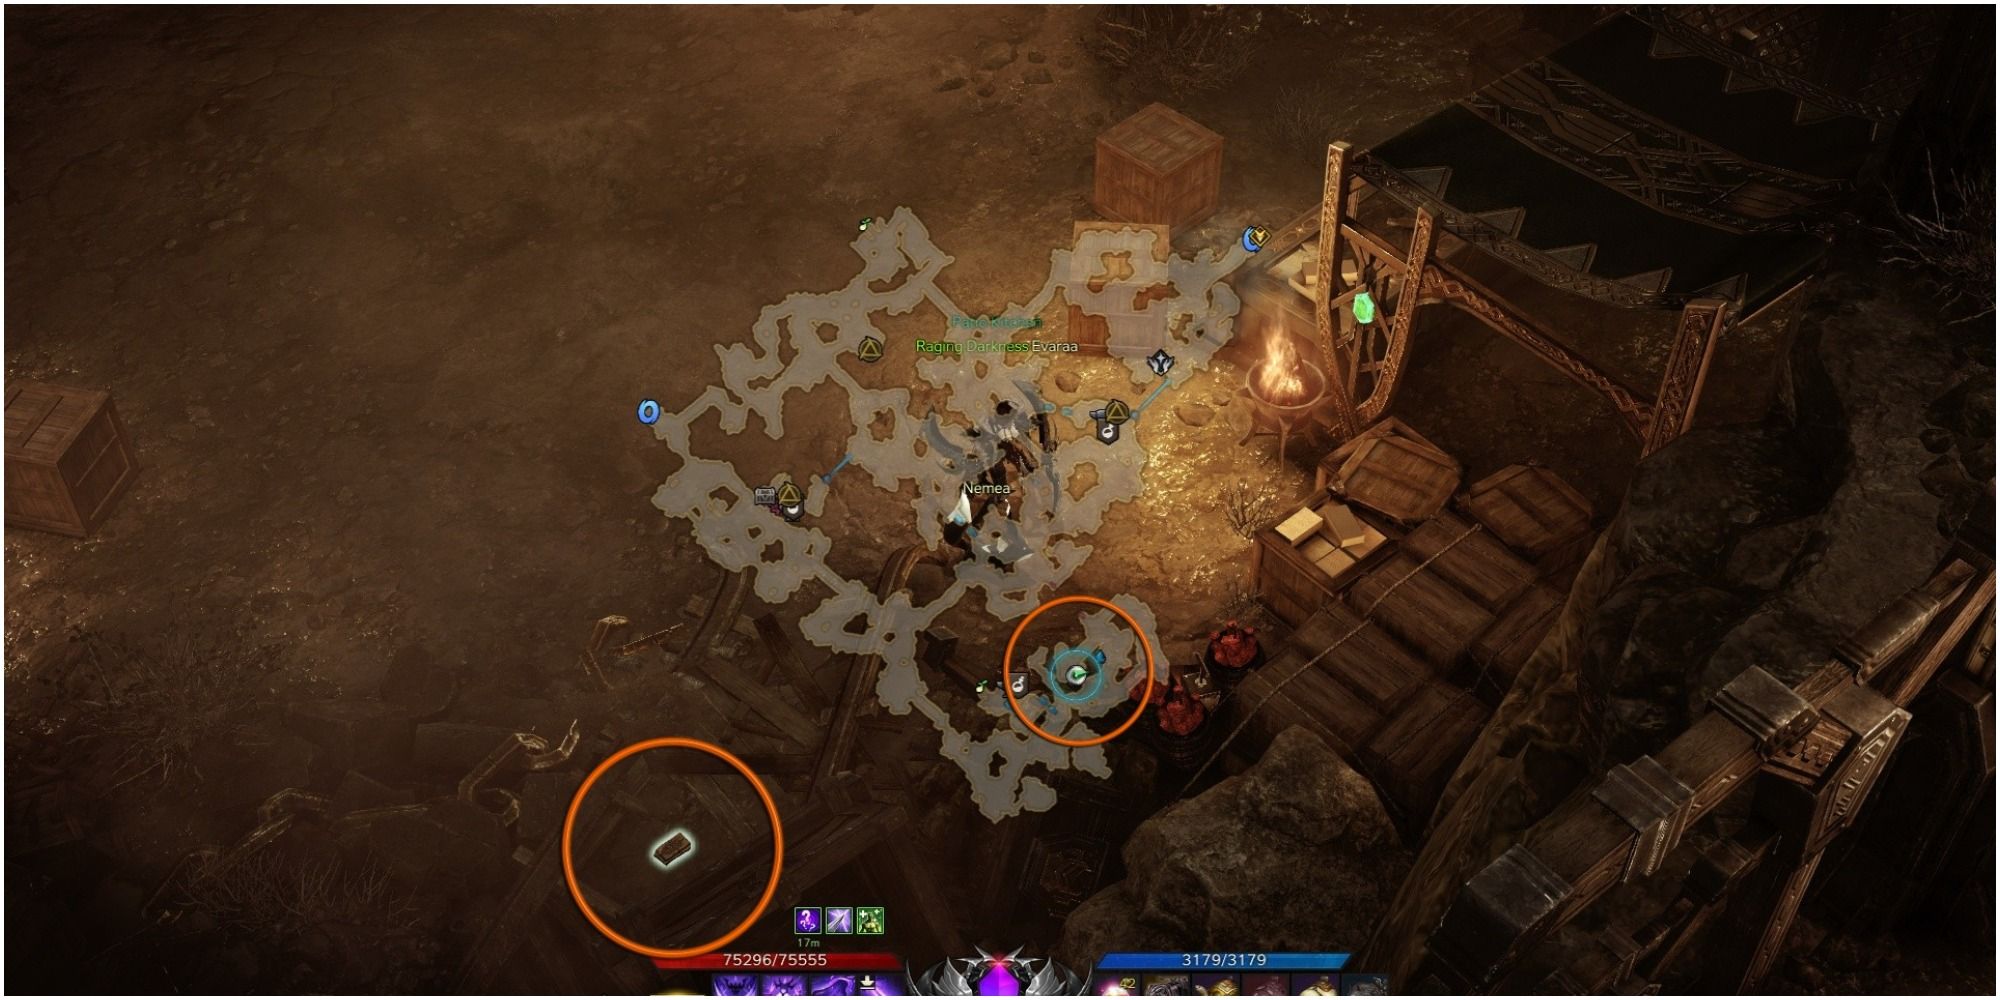 Lost Ark Yorn's Hidden Story 7-4 location with mini-map open, orange circle around object and player icon